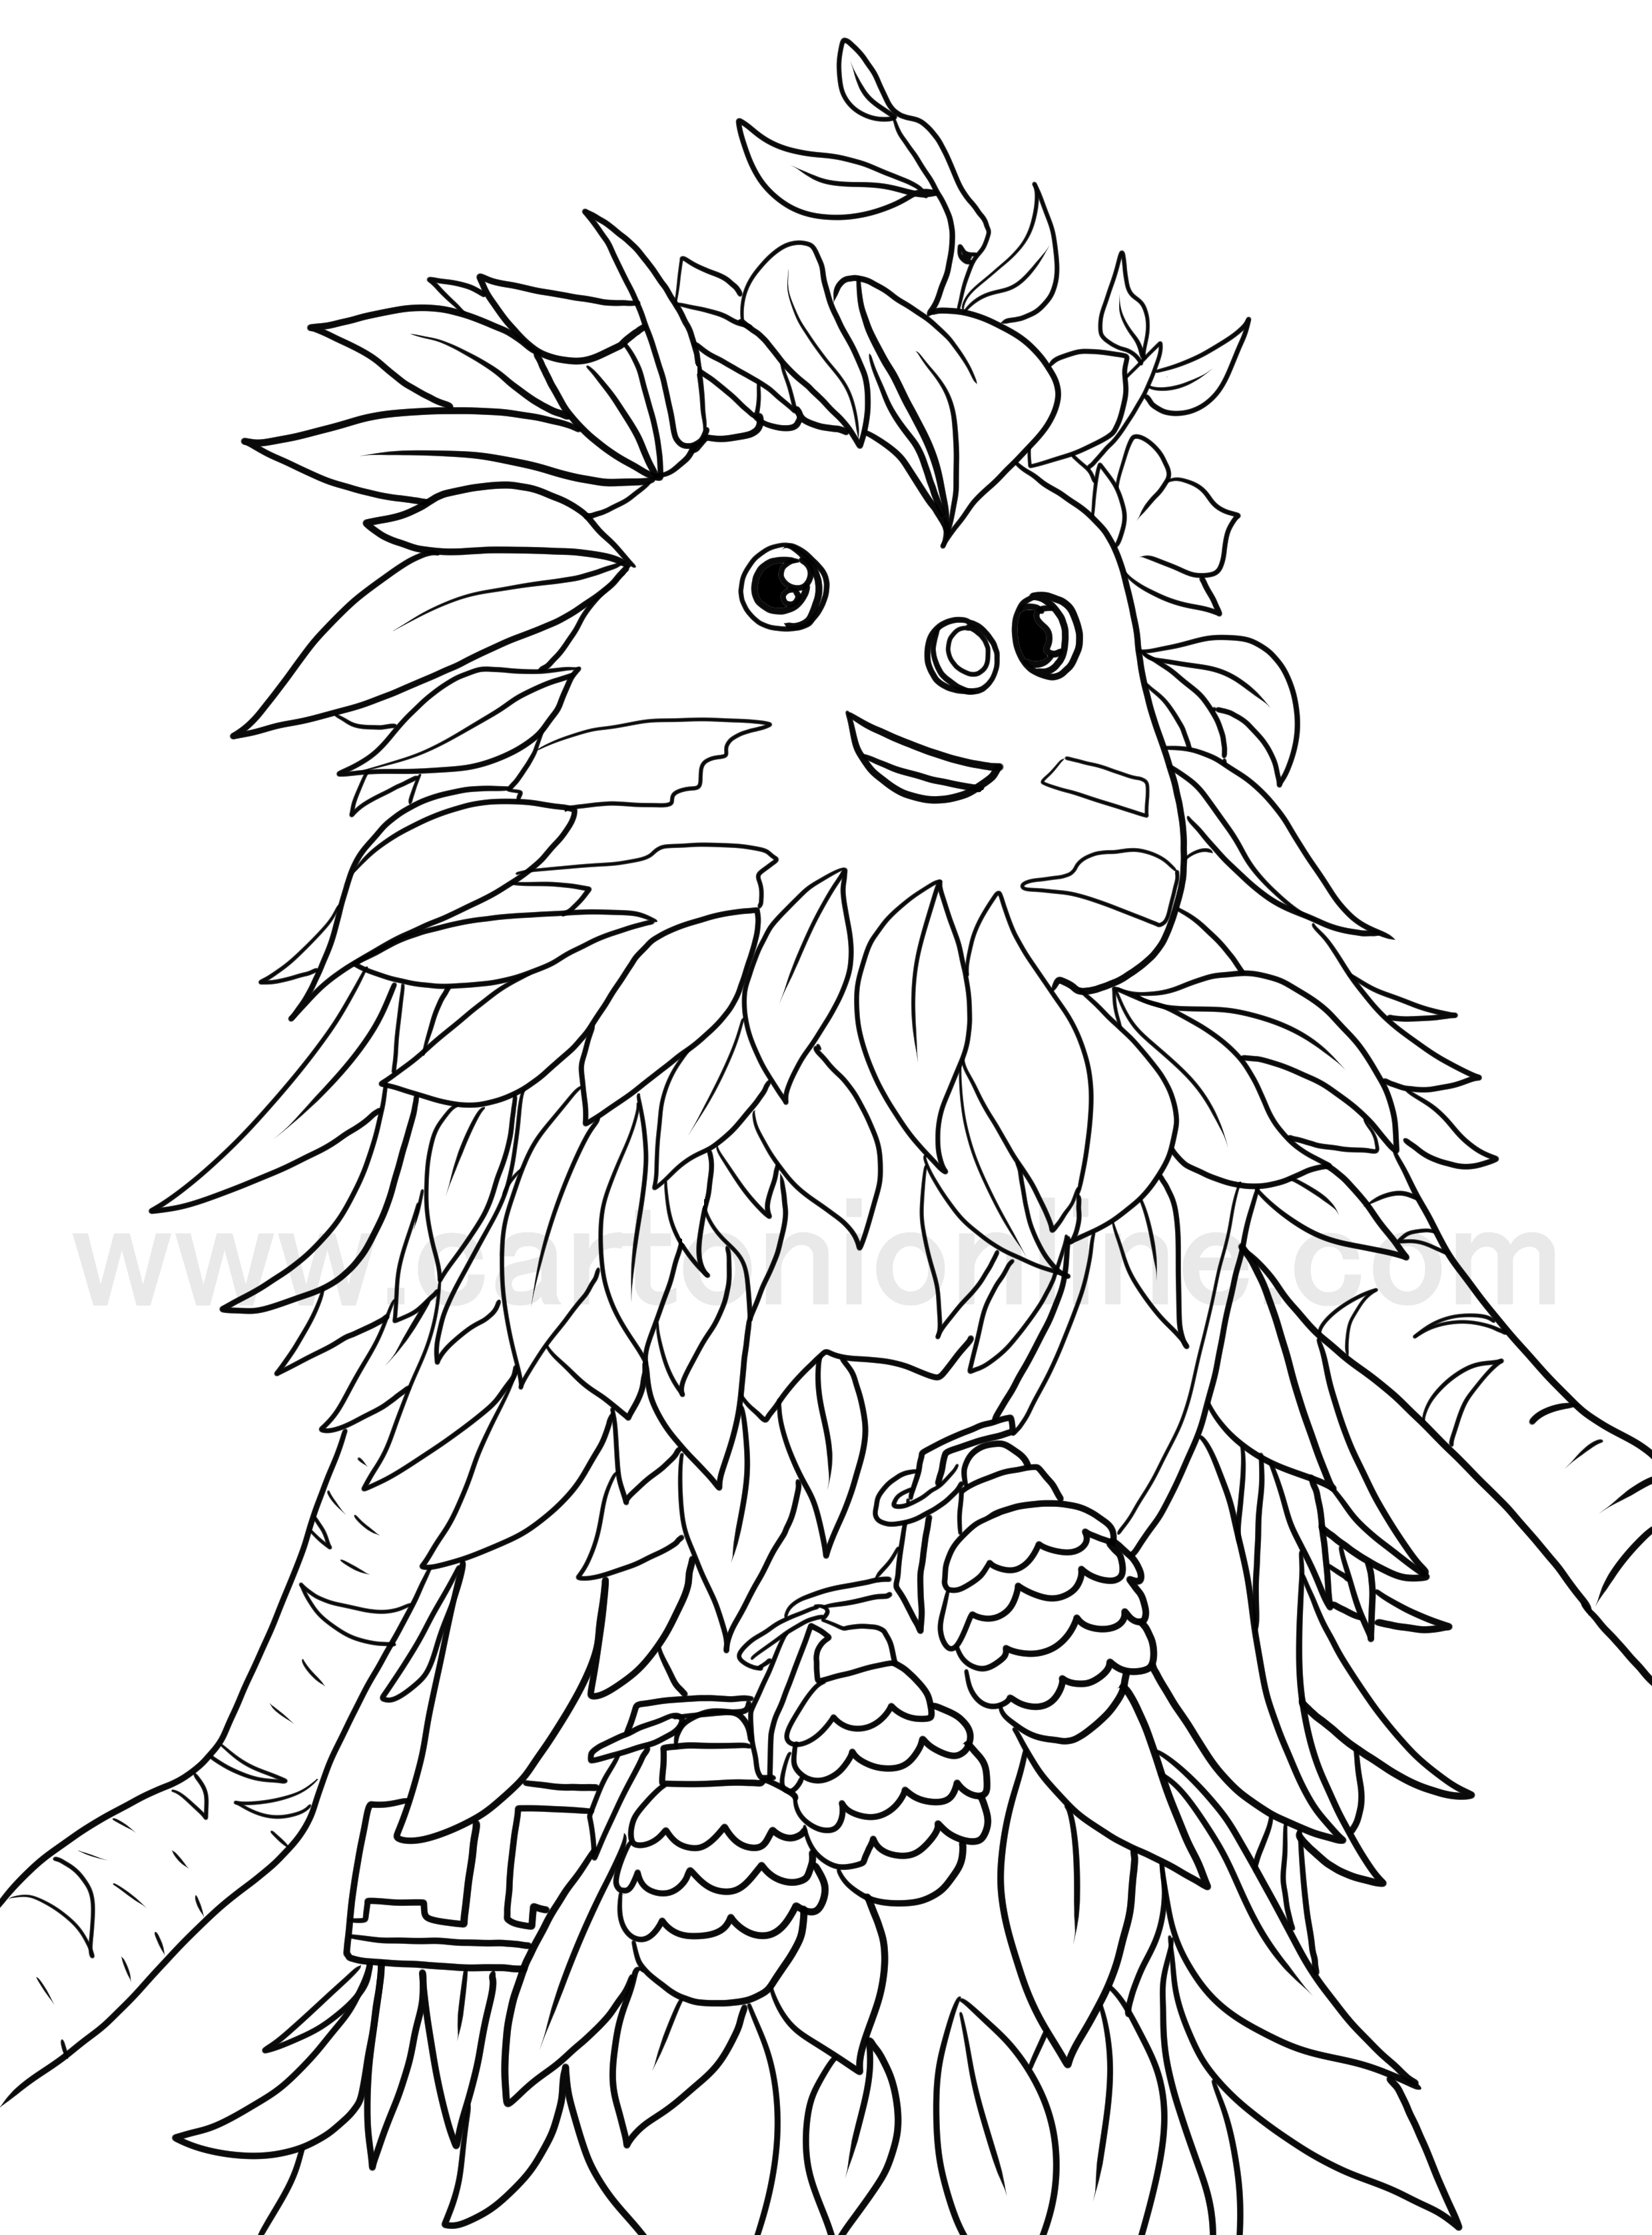 Bush Ranger from Fortnite coloring page to print and coloring